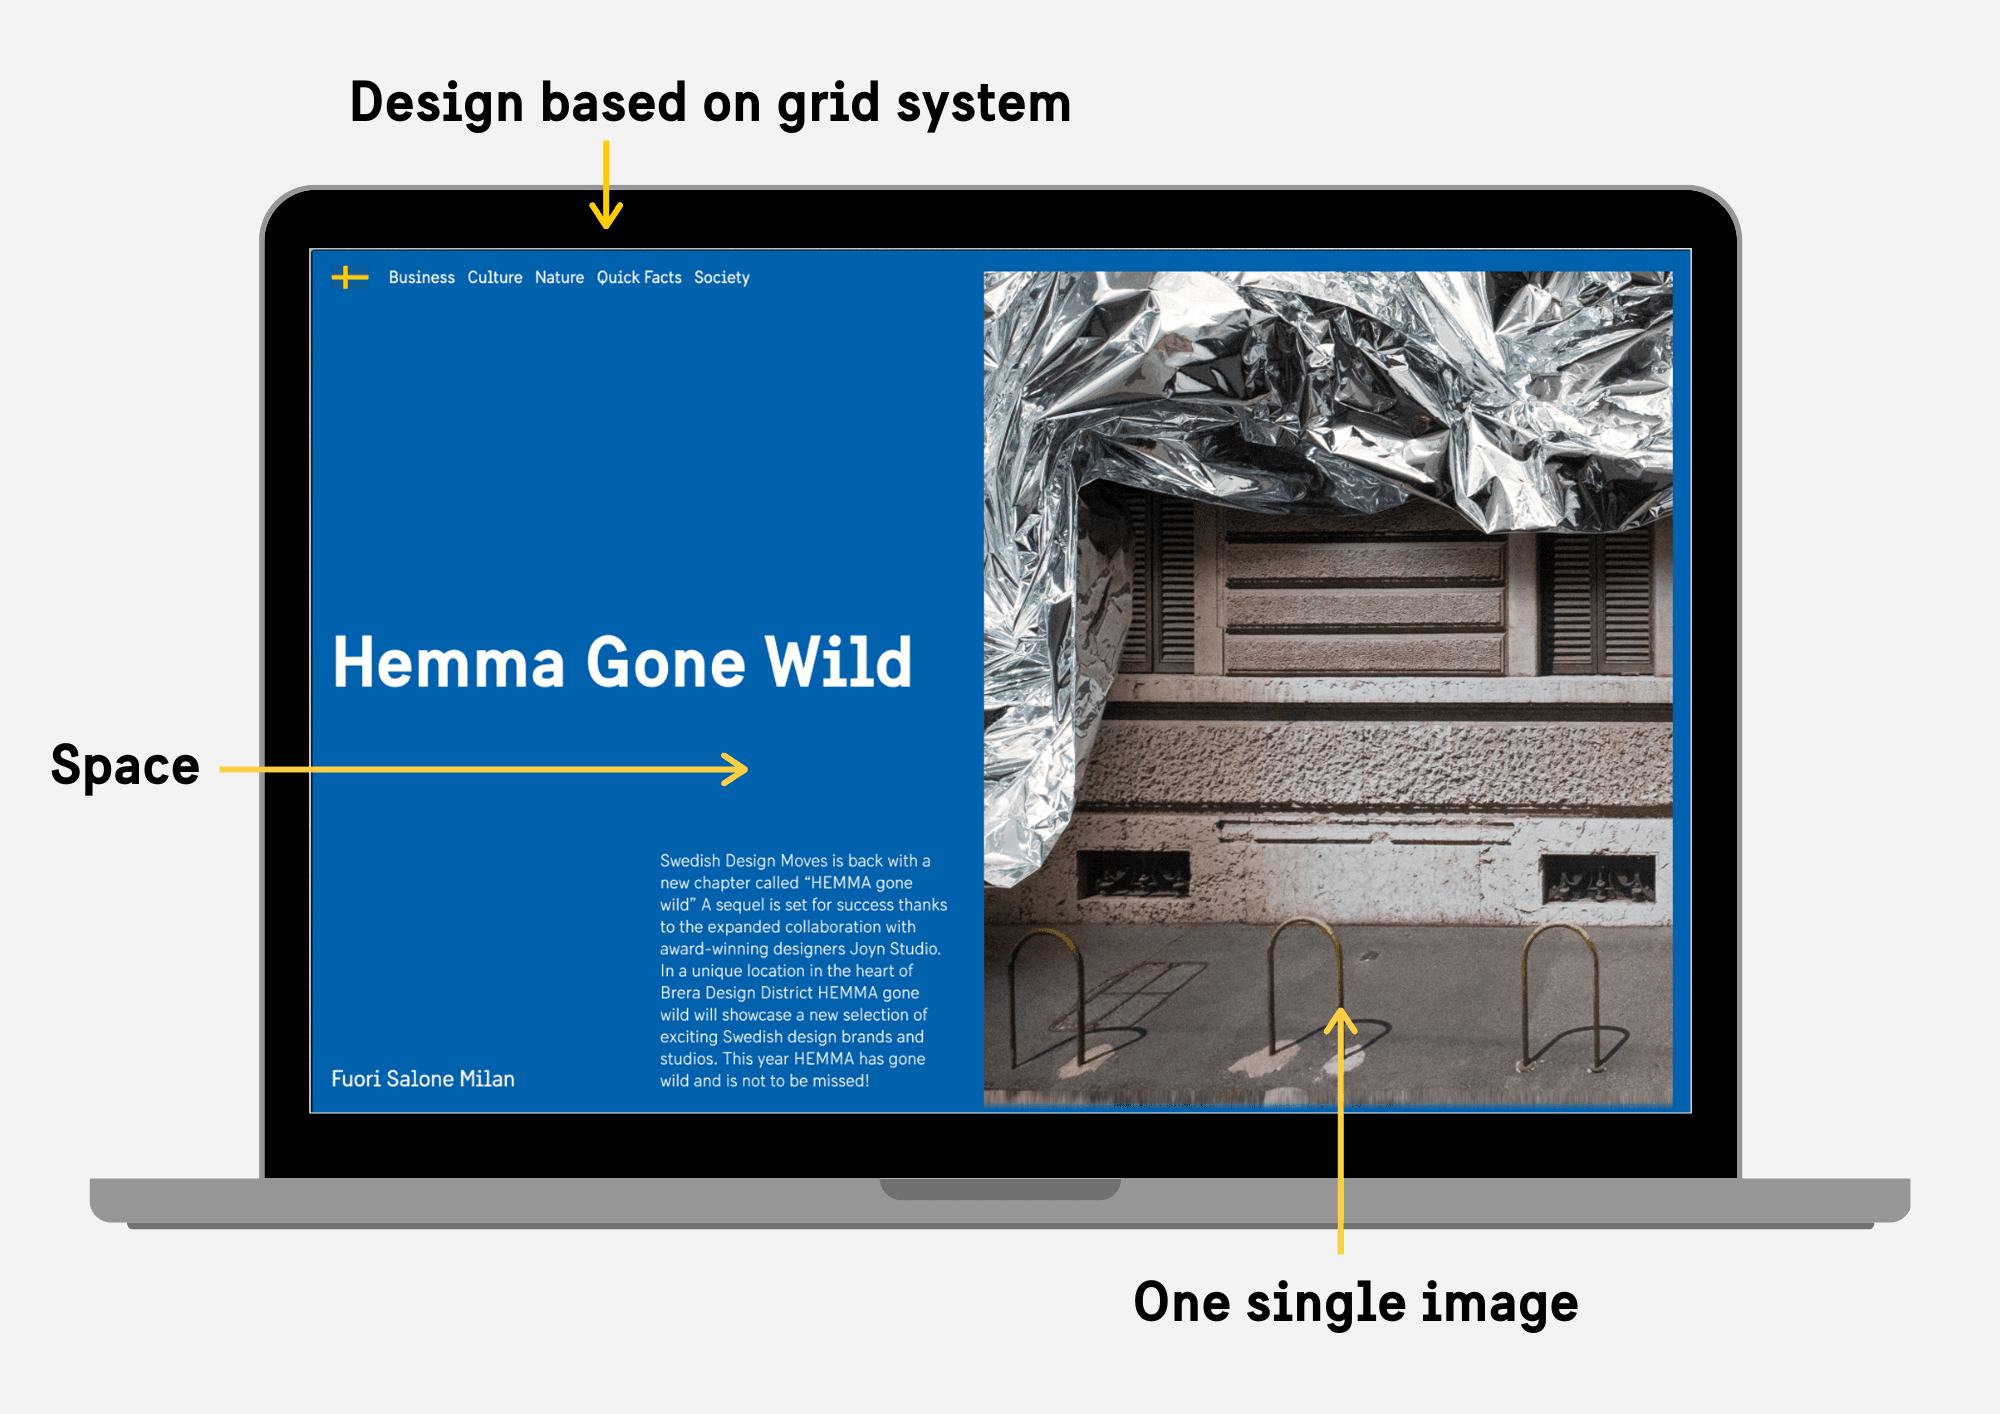 A webpage showing how to design according to the grid system.